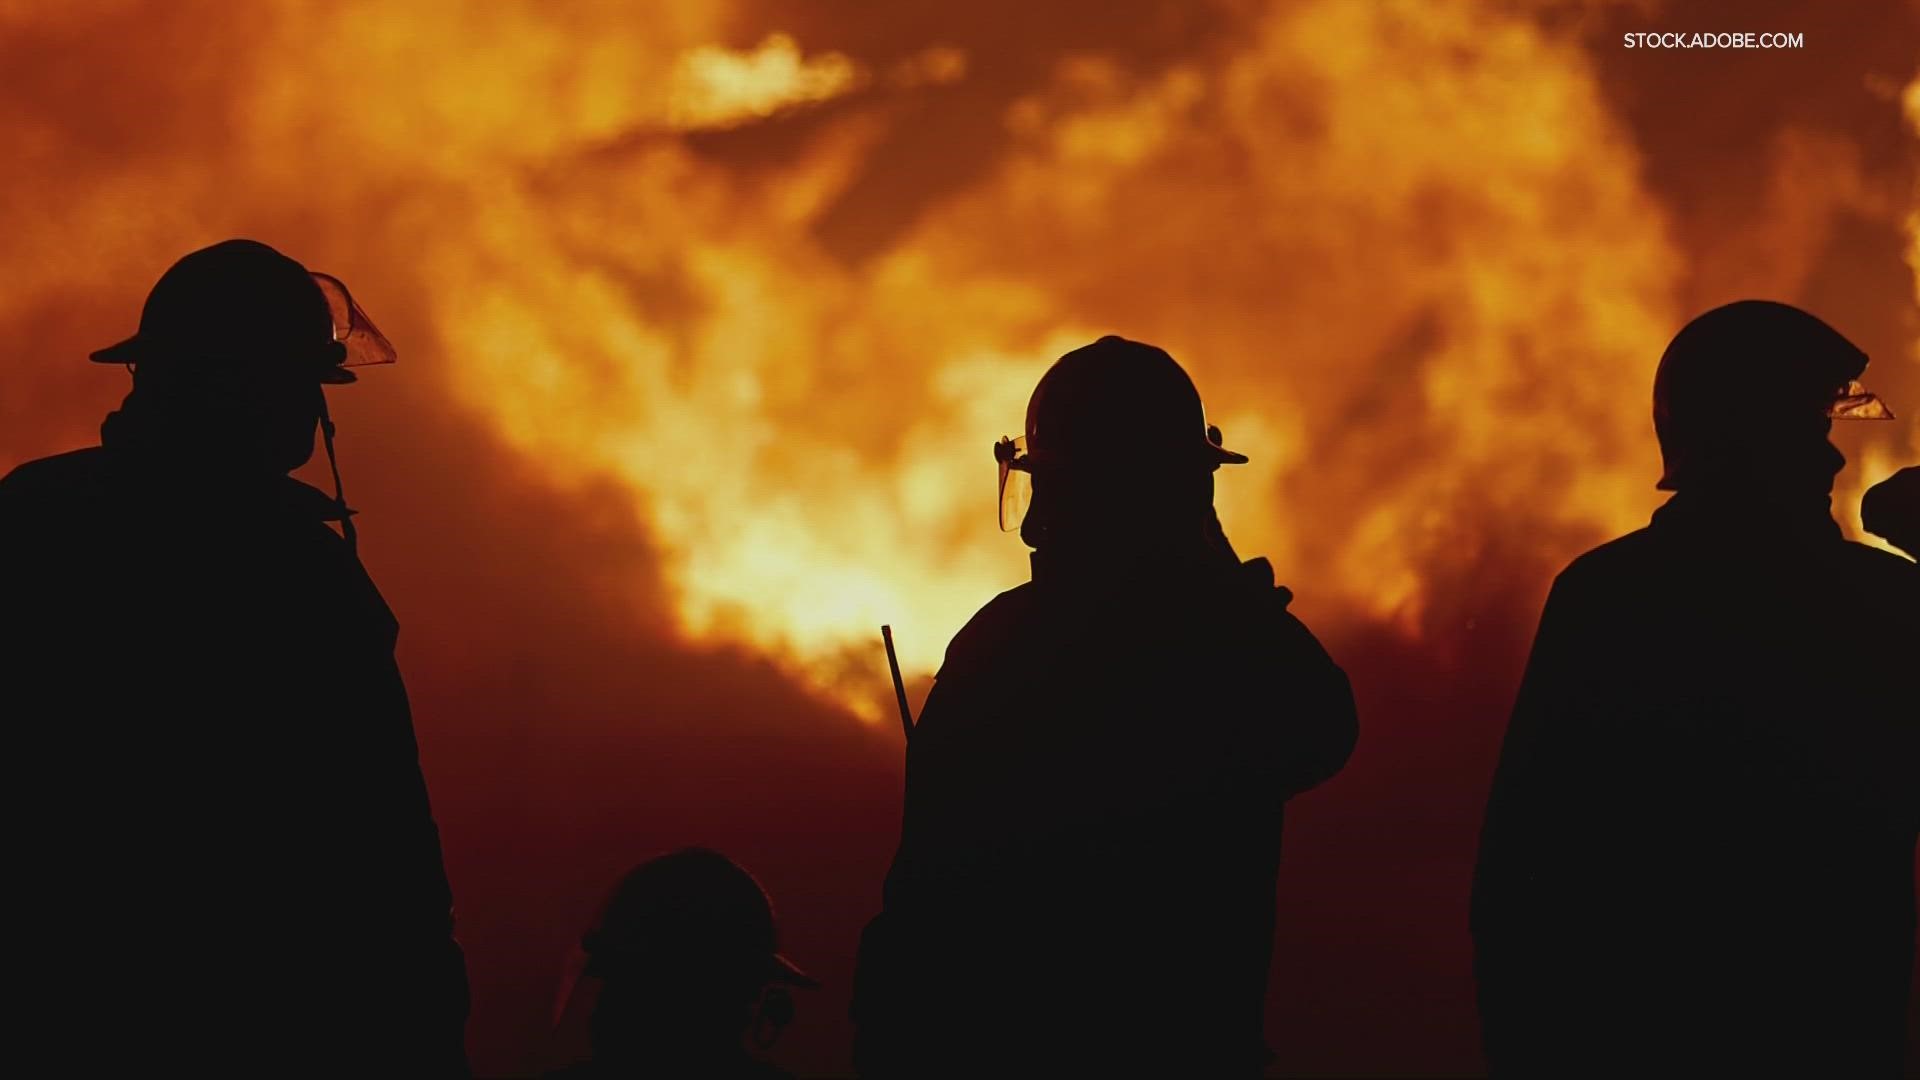 With help from timber giant Weyerhaeuser, the Firefighter Behavioral Health Alliance has set up an online behavioral health resource especially for firefighters.